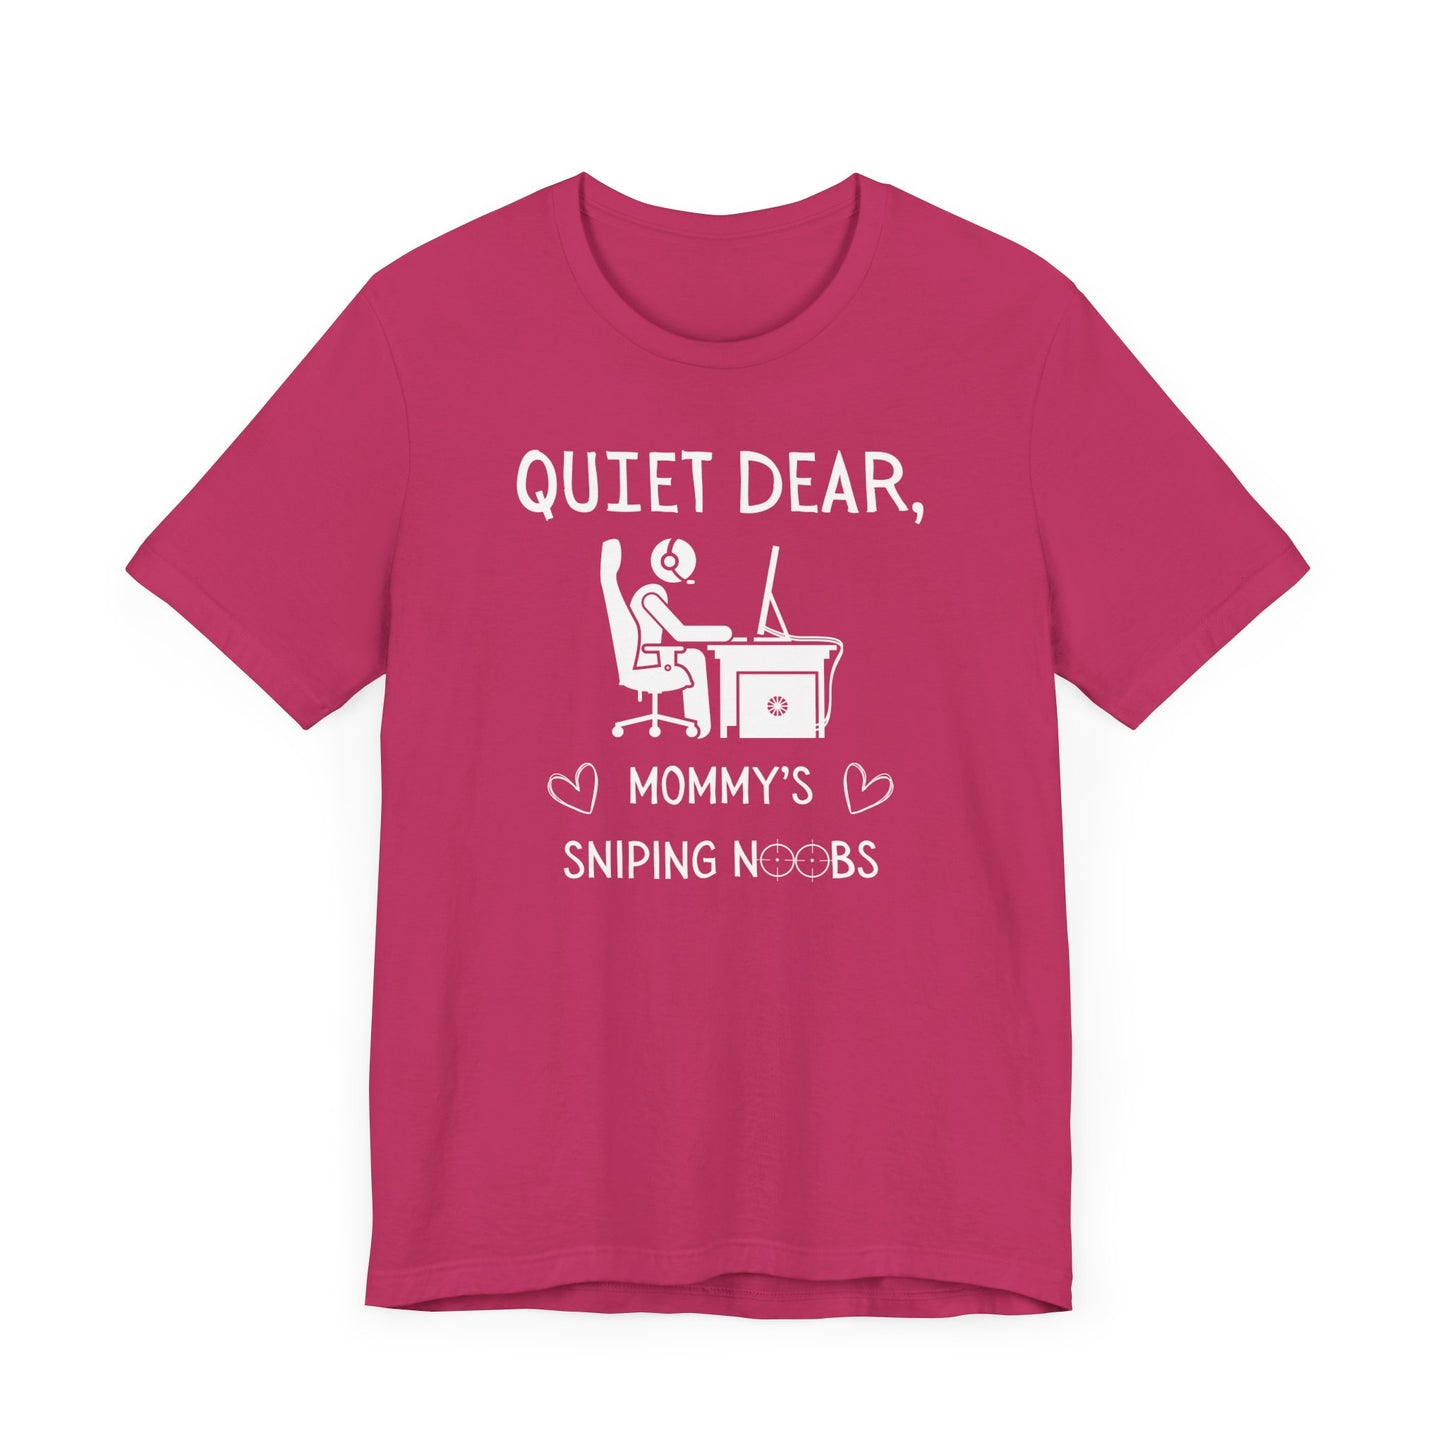 A flat image of a berry pink t-shirt that reads Quiet Dear, Mommy's Sniping Noobs in white text. The lower text is framed by two hearts, and the O's are in the shape of sniper scopes. In the center of the shirt is an image of a person at a desk with a gaming PC.